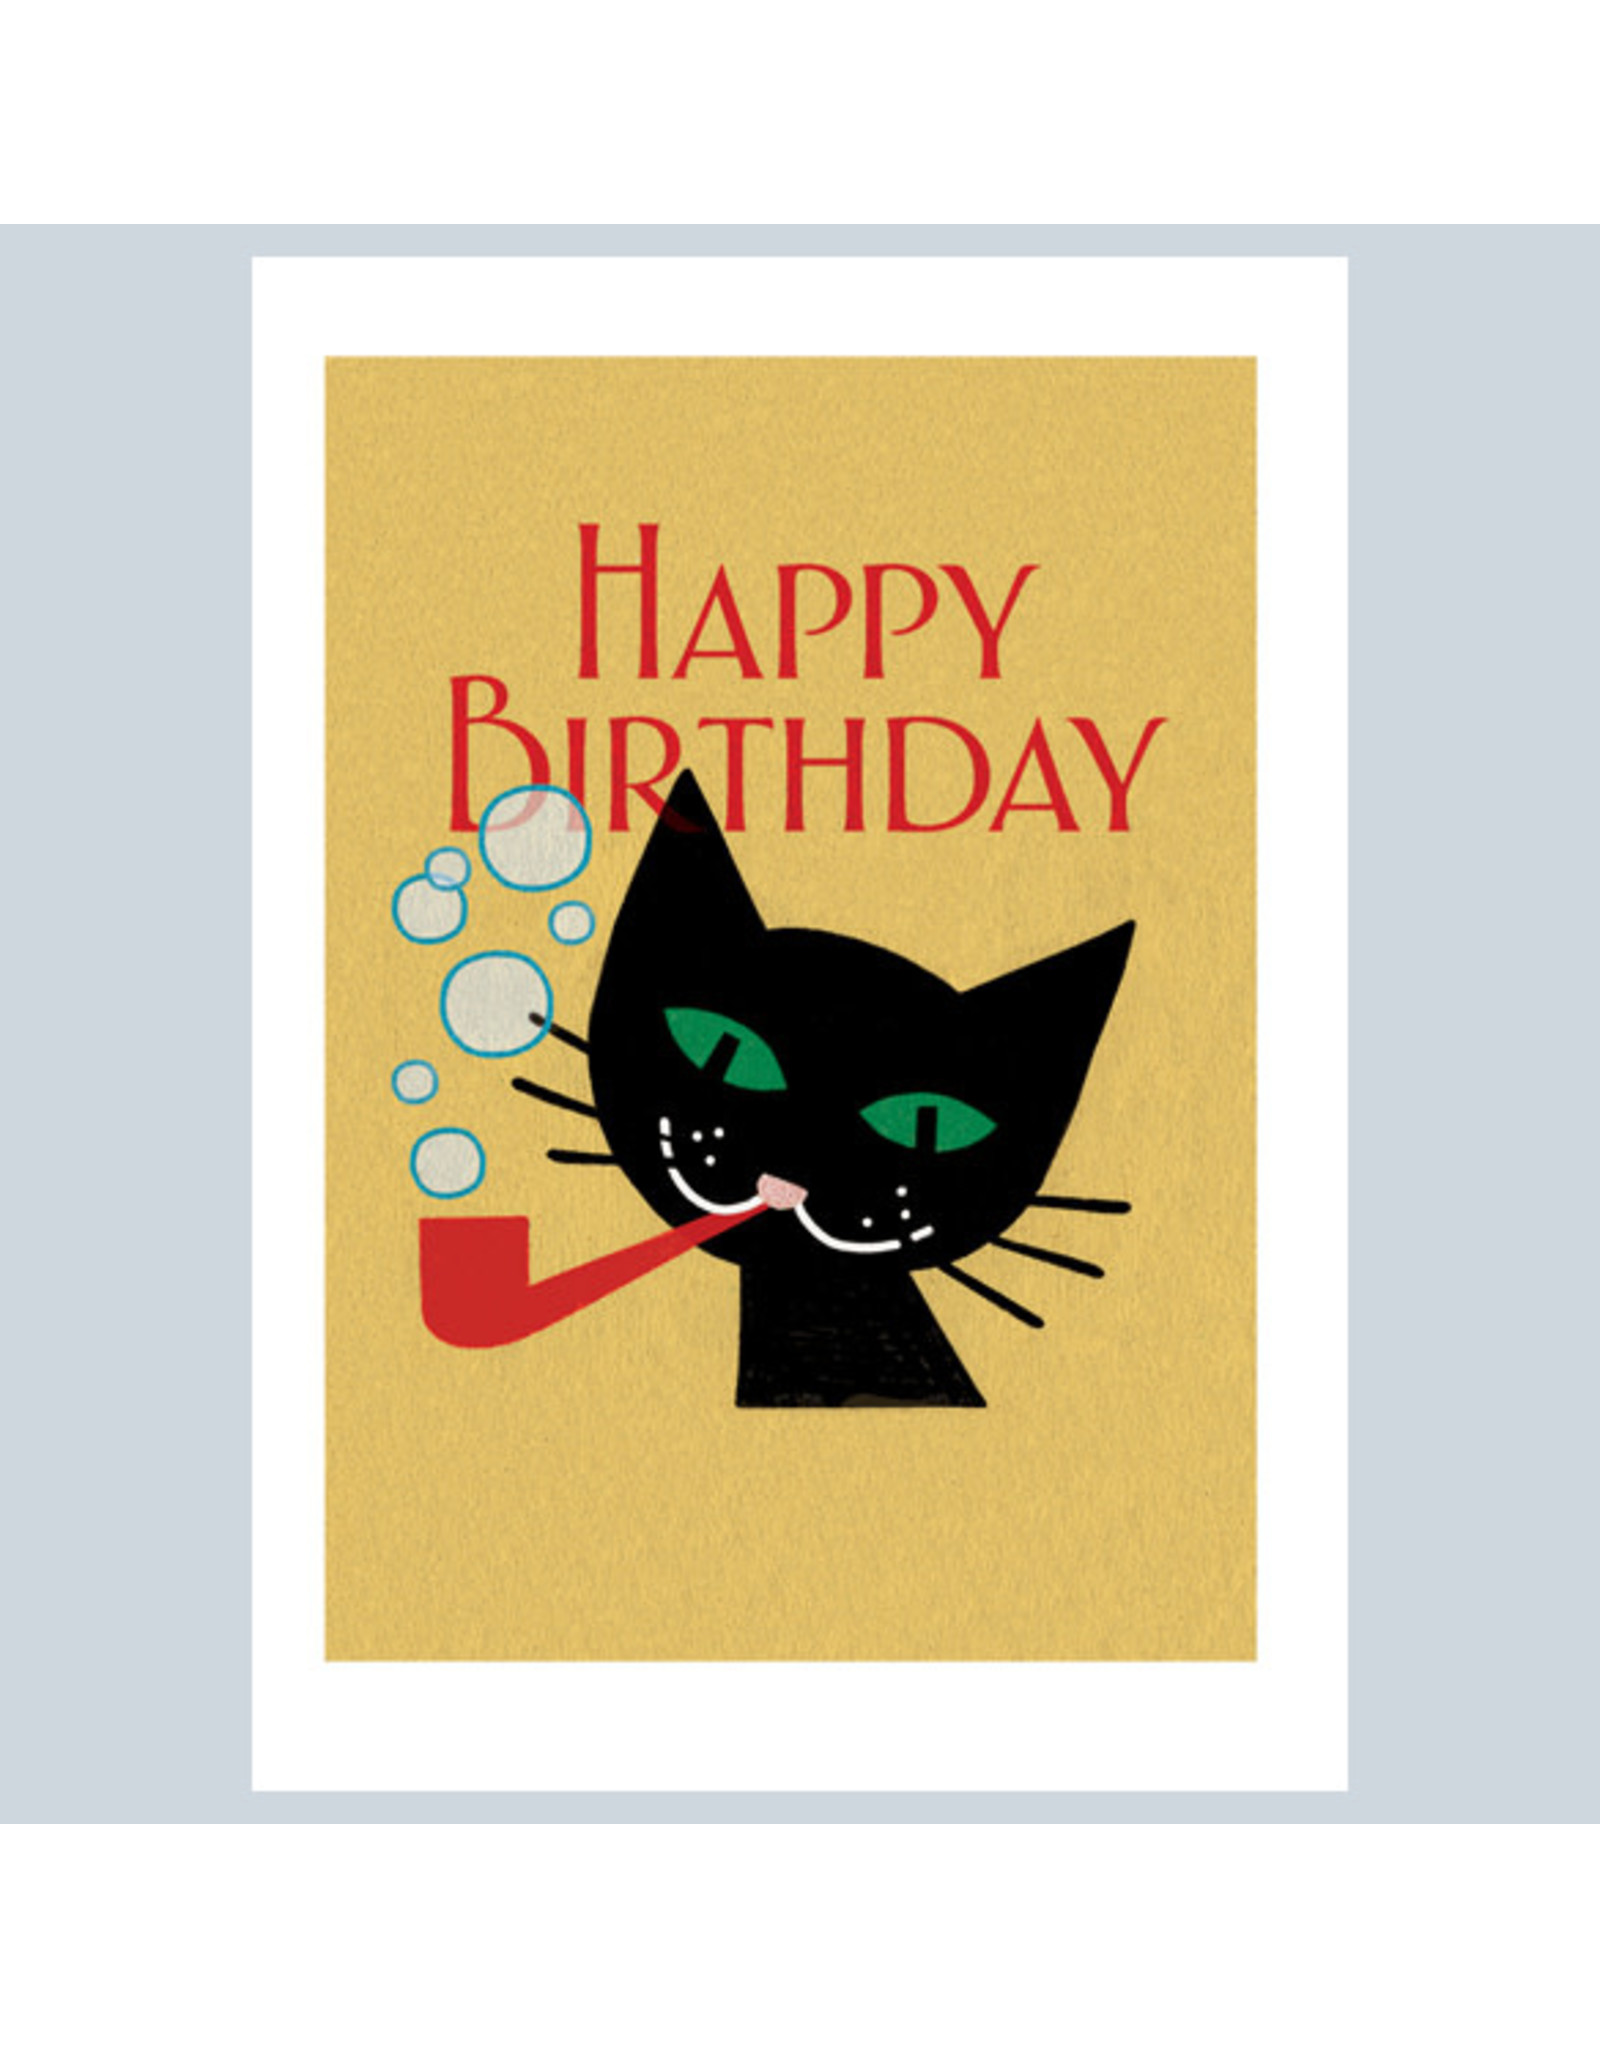 Laughing Elephant Cat with Pipe Birthday Notecard